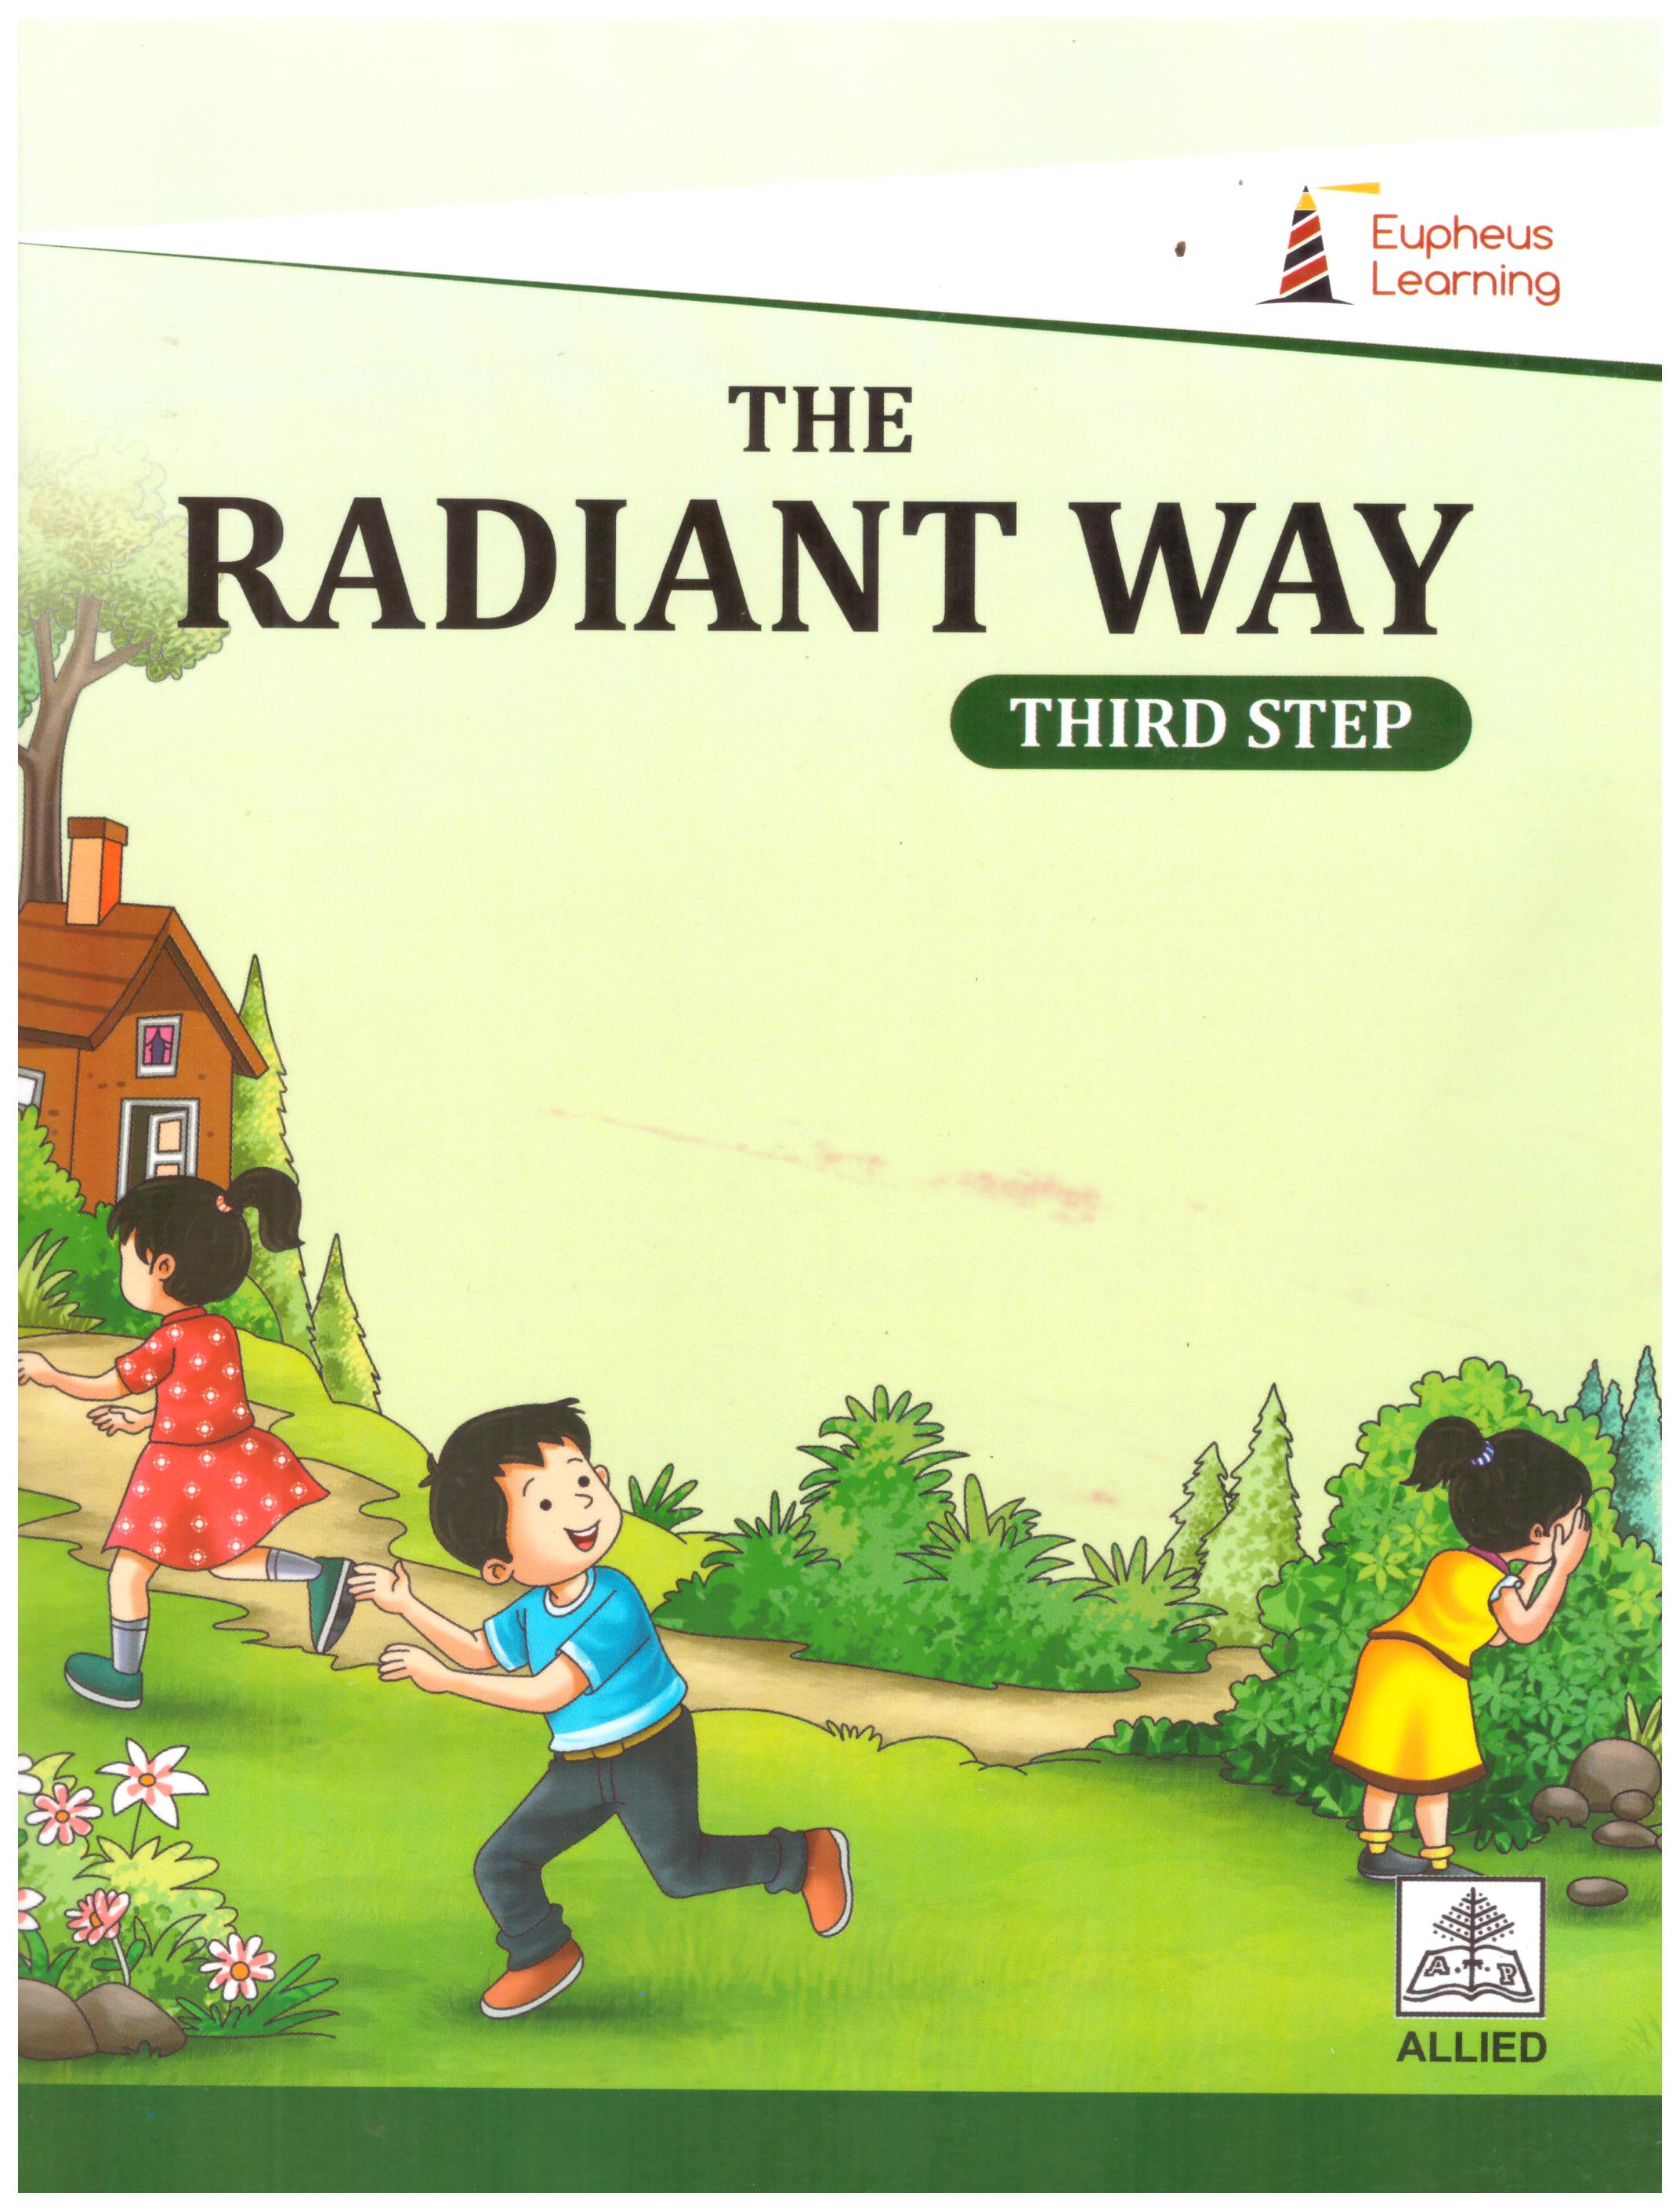 The Radiant Way Third Step